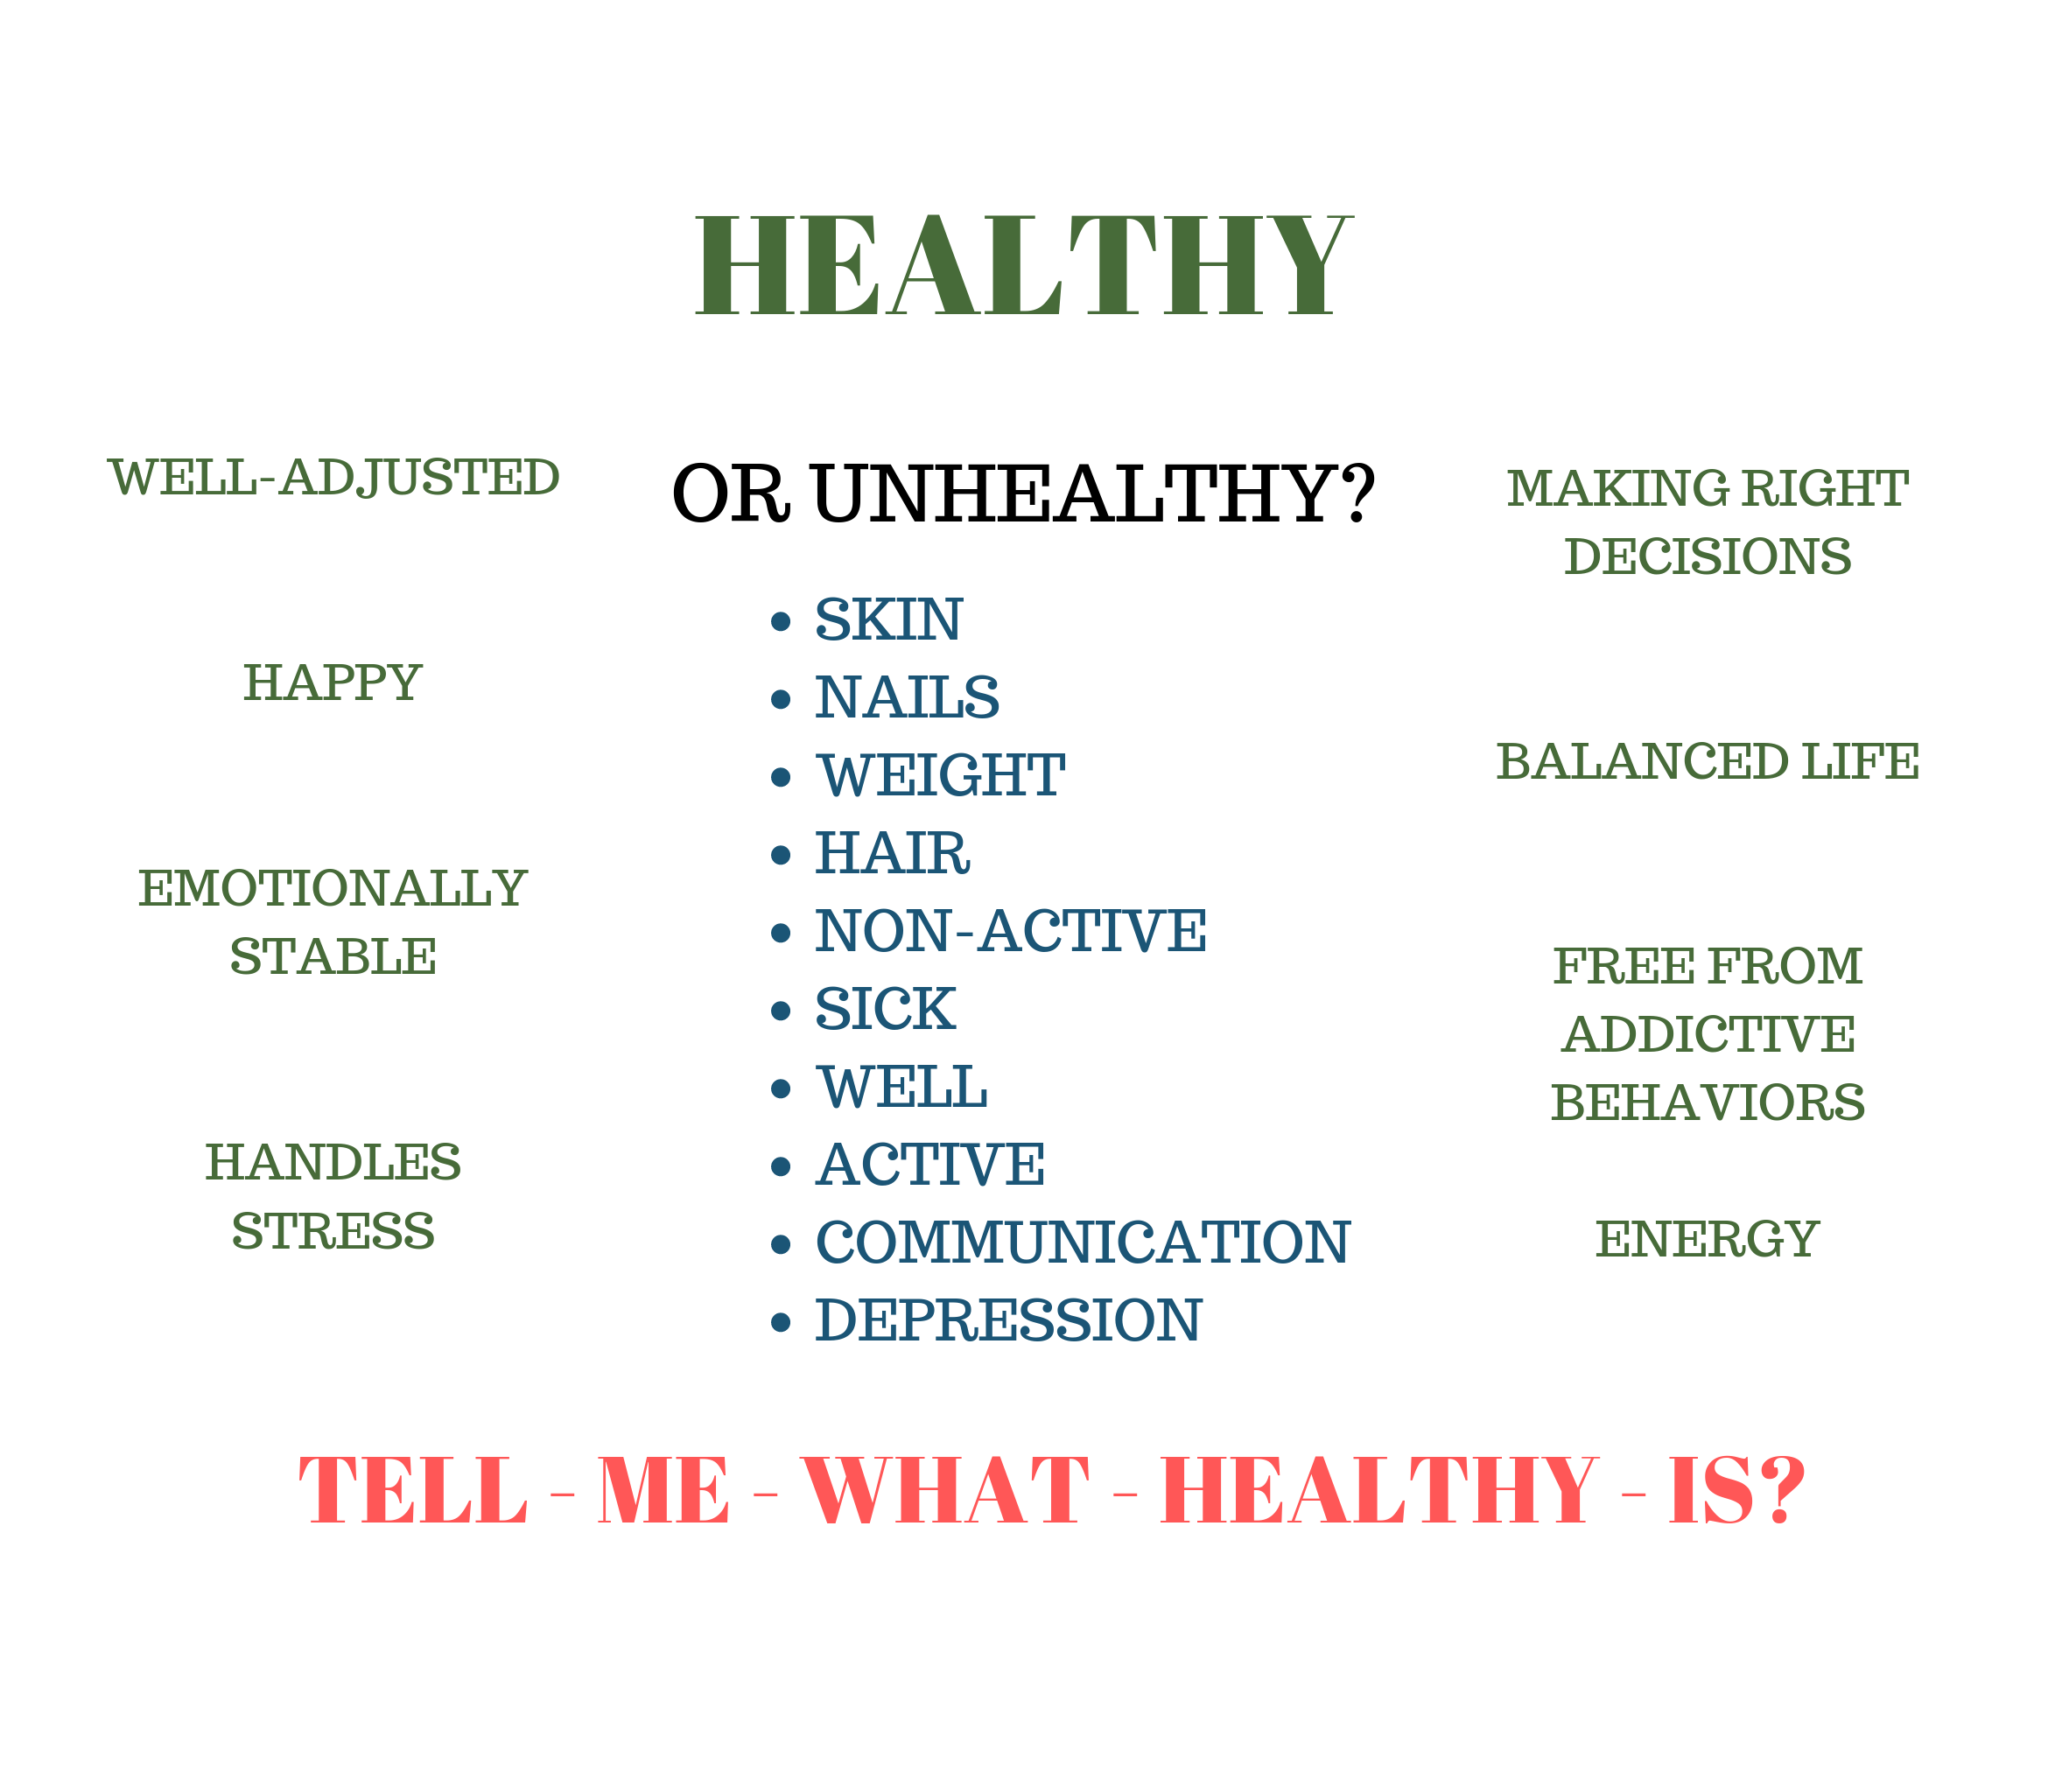 When Does Unhealthy Become Healthy?